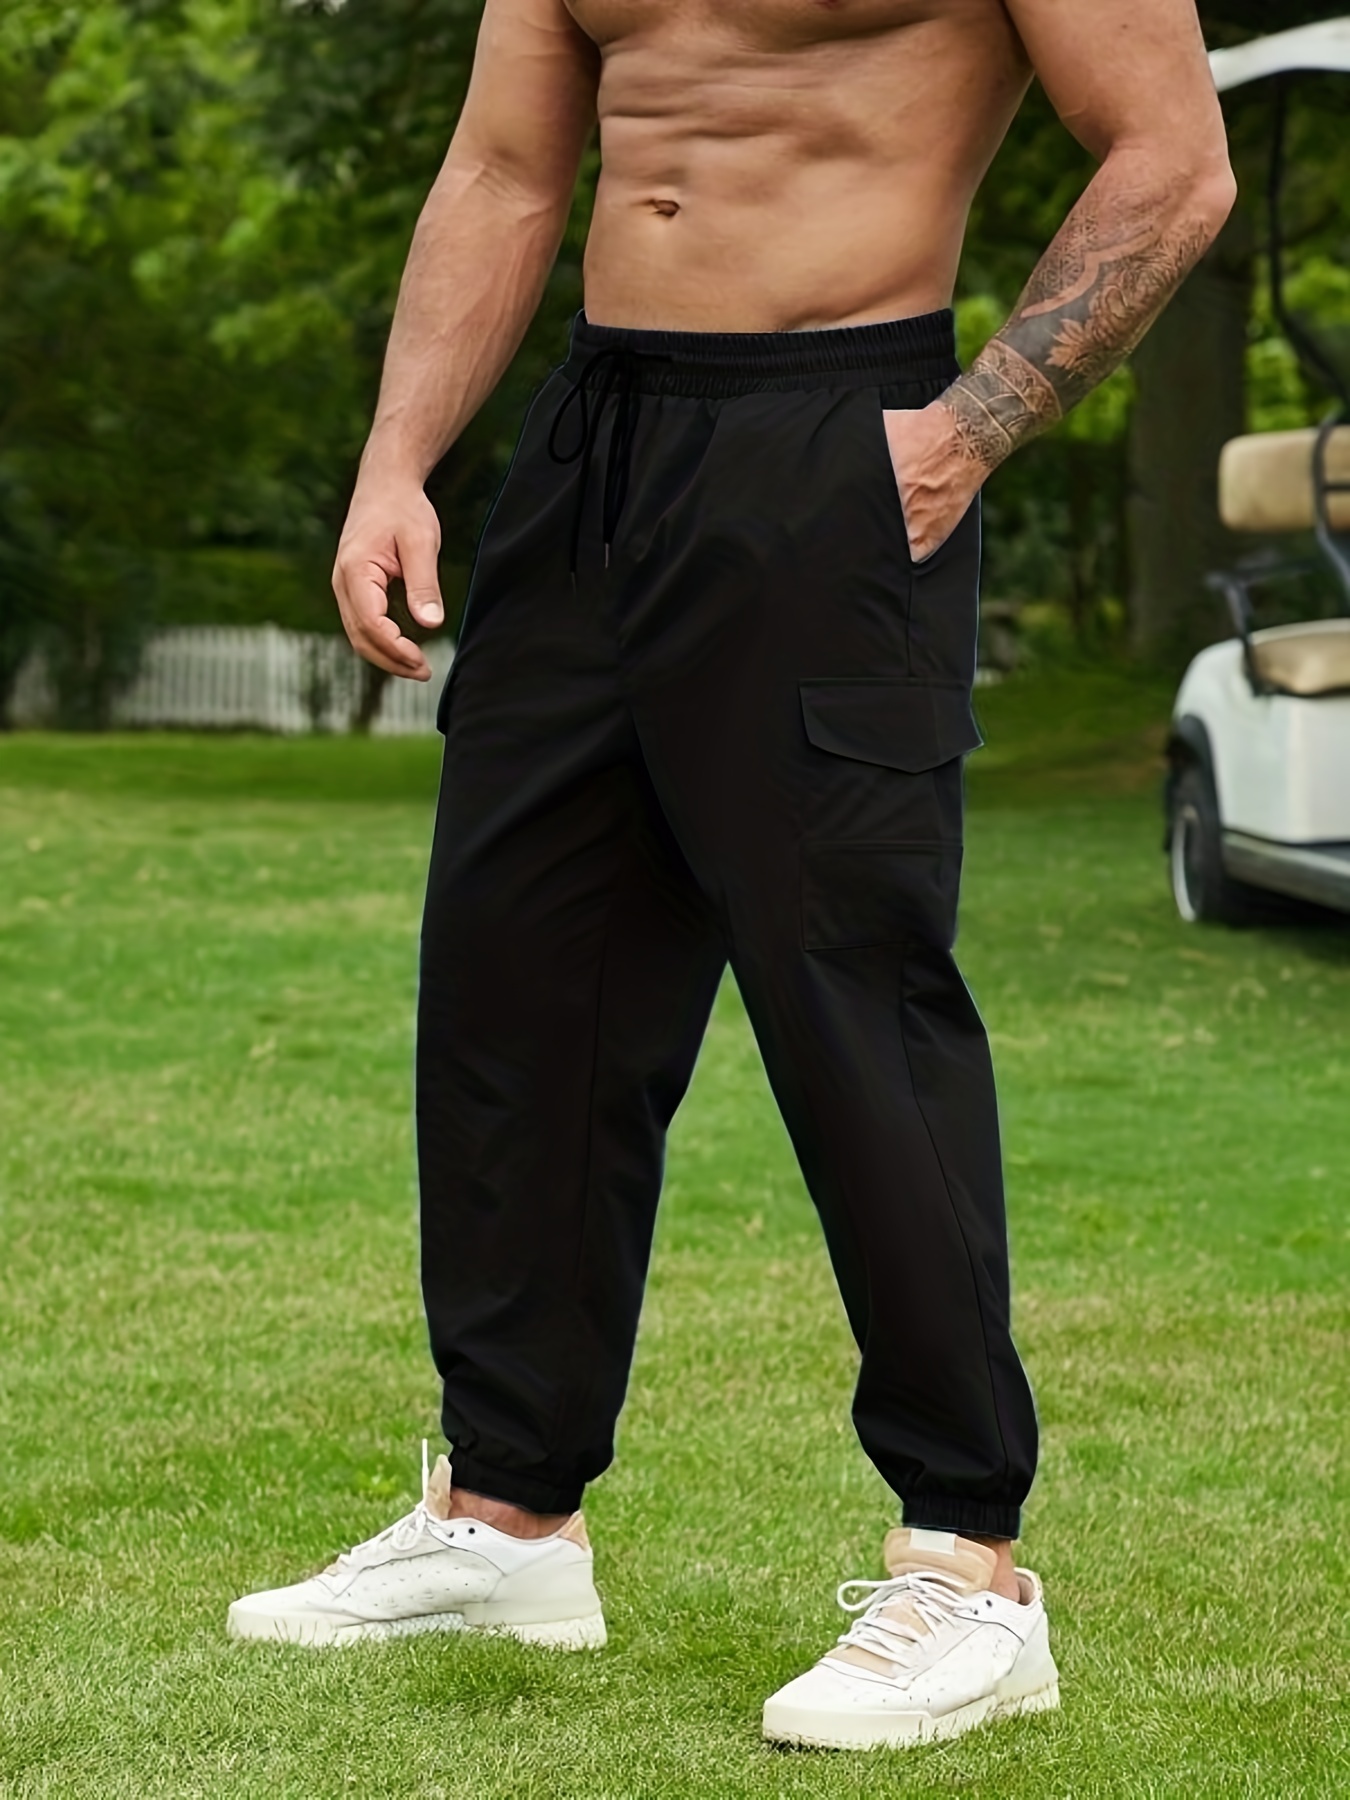 Plus Size Men's Track Pants Drawstring Sweatpants, Athletic Jogger Bottom  With Side Taping, Oversized Loose Clothing For Men